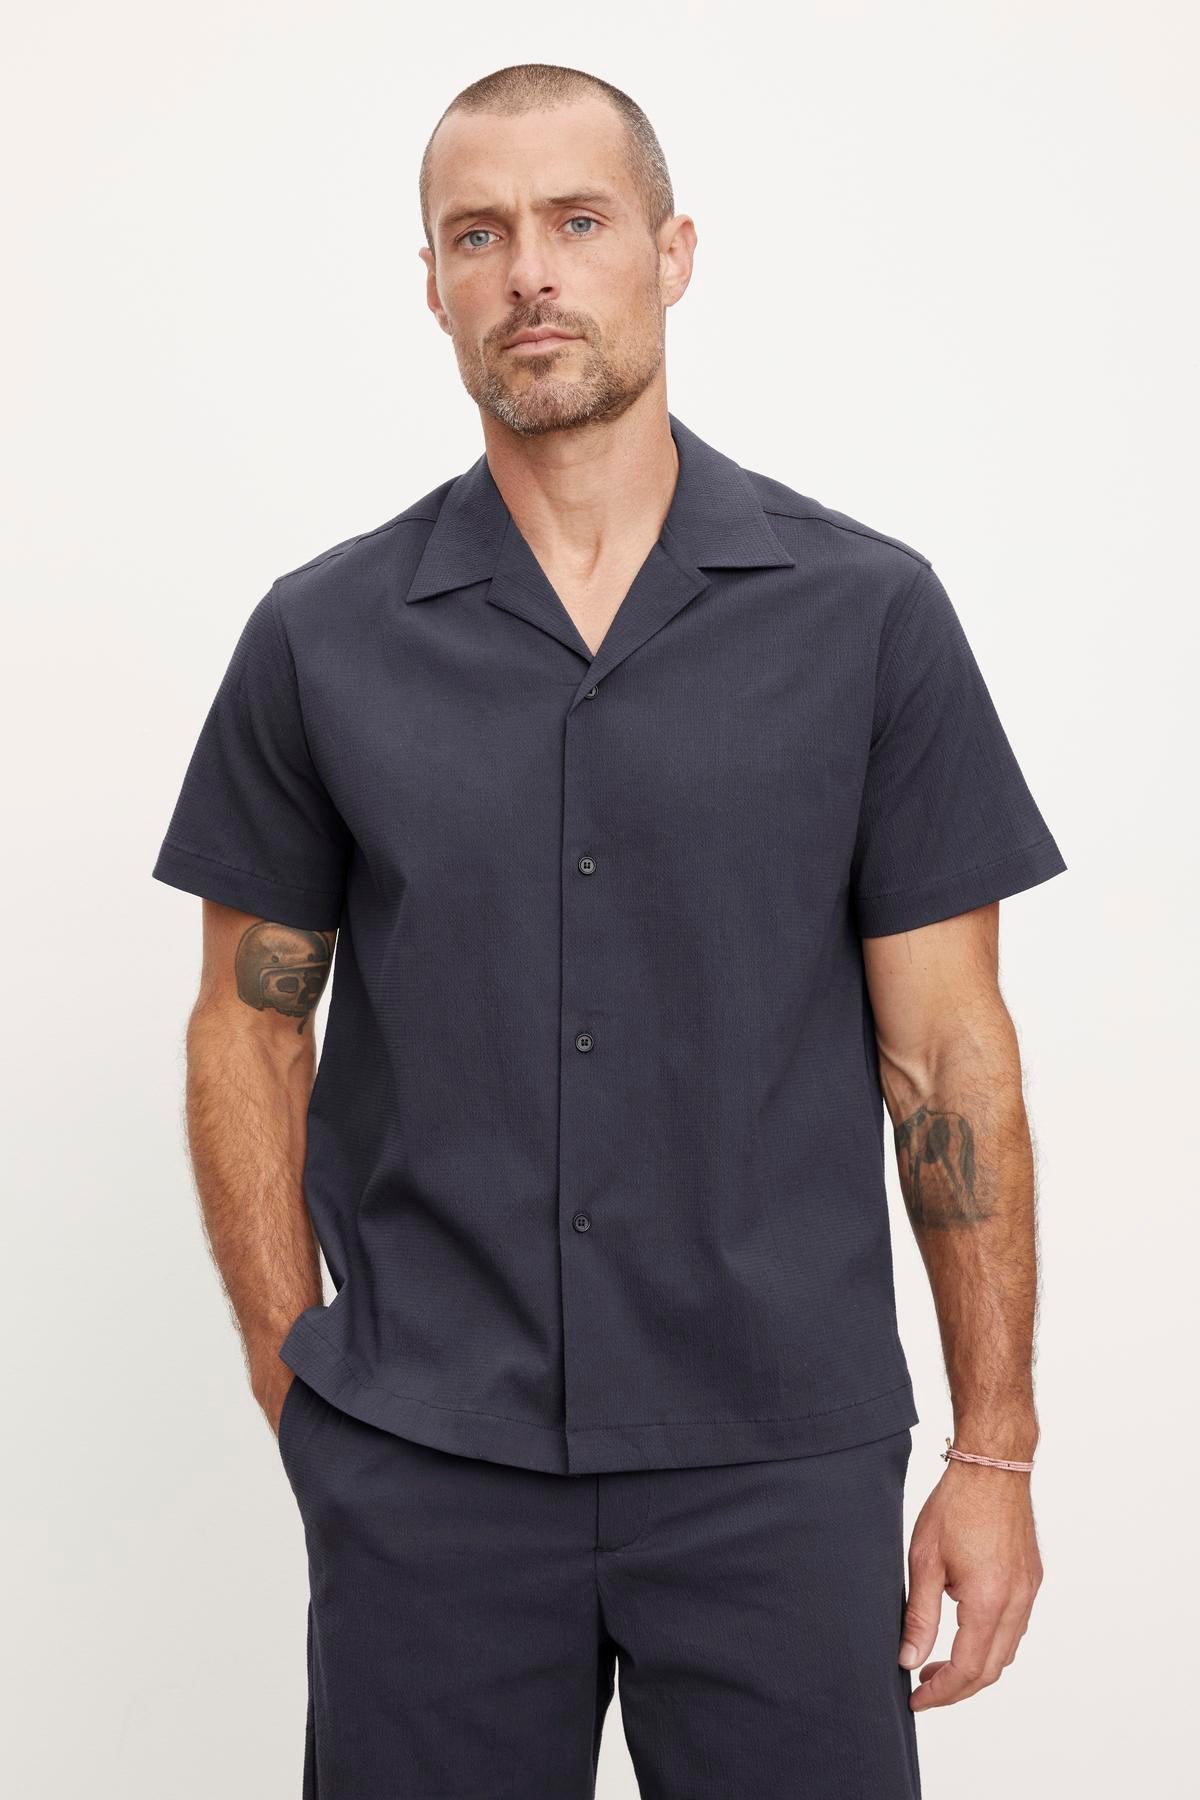   A man with a neutral expression wearing a dark grey relaxed fit short-sleeved Velvet by Graham & Spencer FRANK BUTTON-UP SHIRT and matching pants, showing visible tattoos on both arms. 